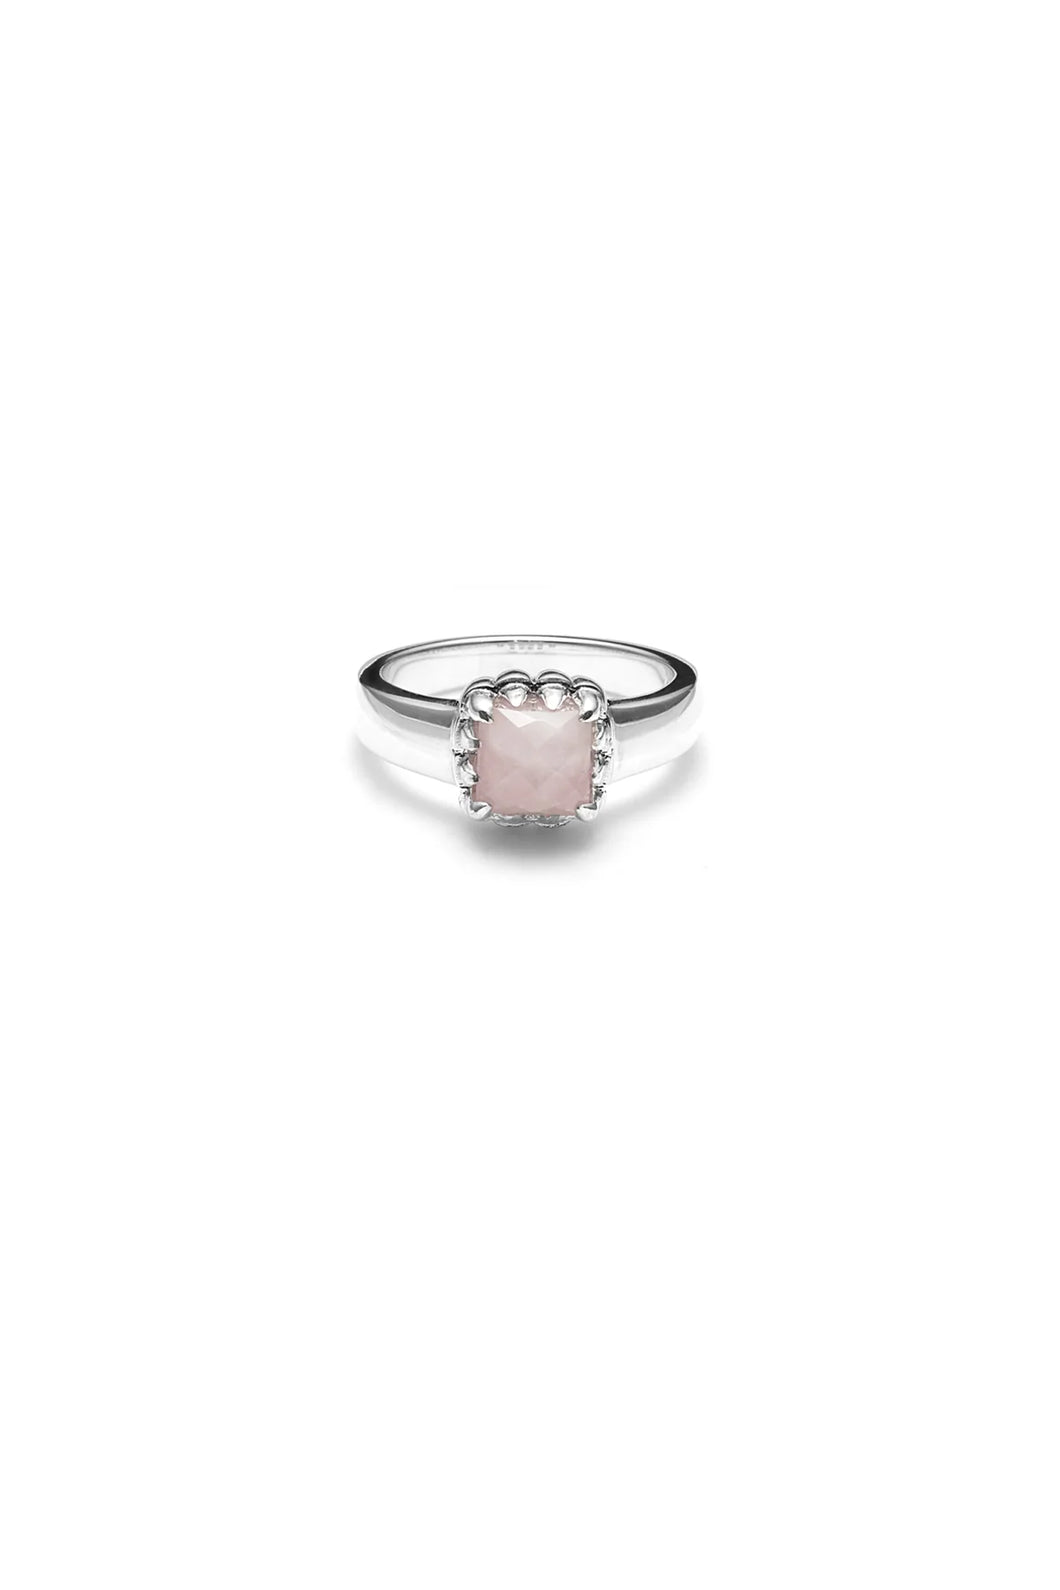 Baby Claw Ring - Rose Quartz/Silver